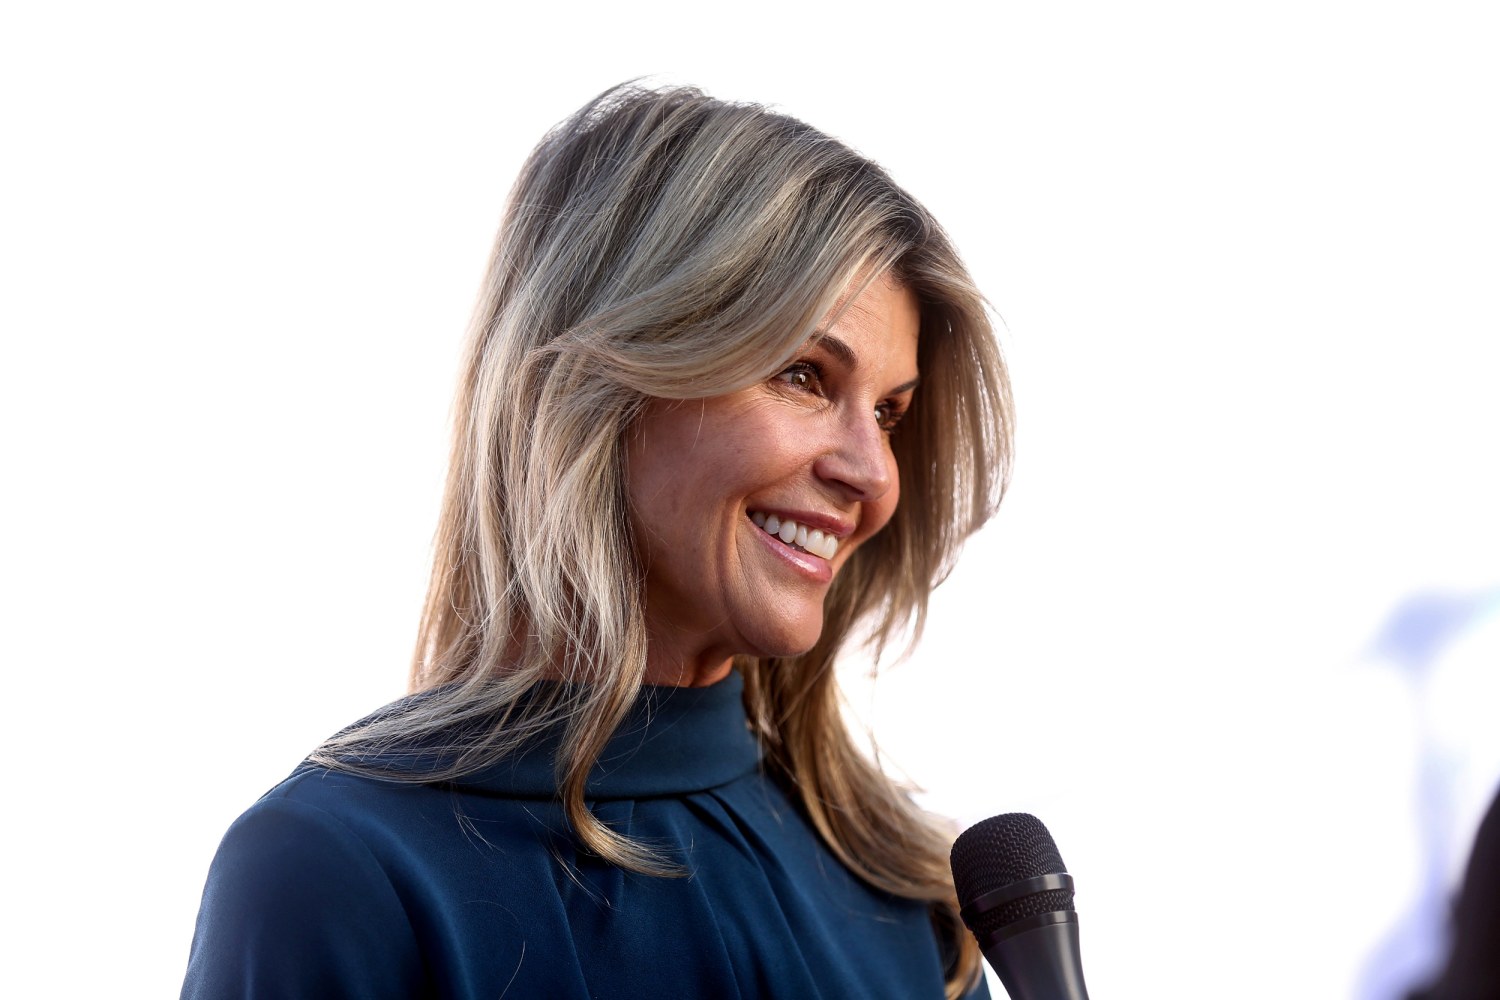 Watch Lori Loughlin return to TV after college admissions scandal